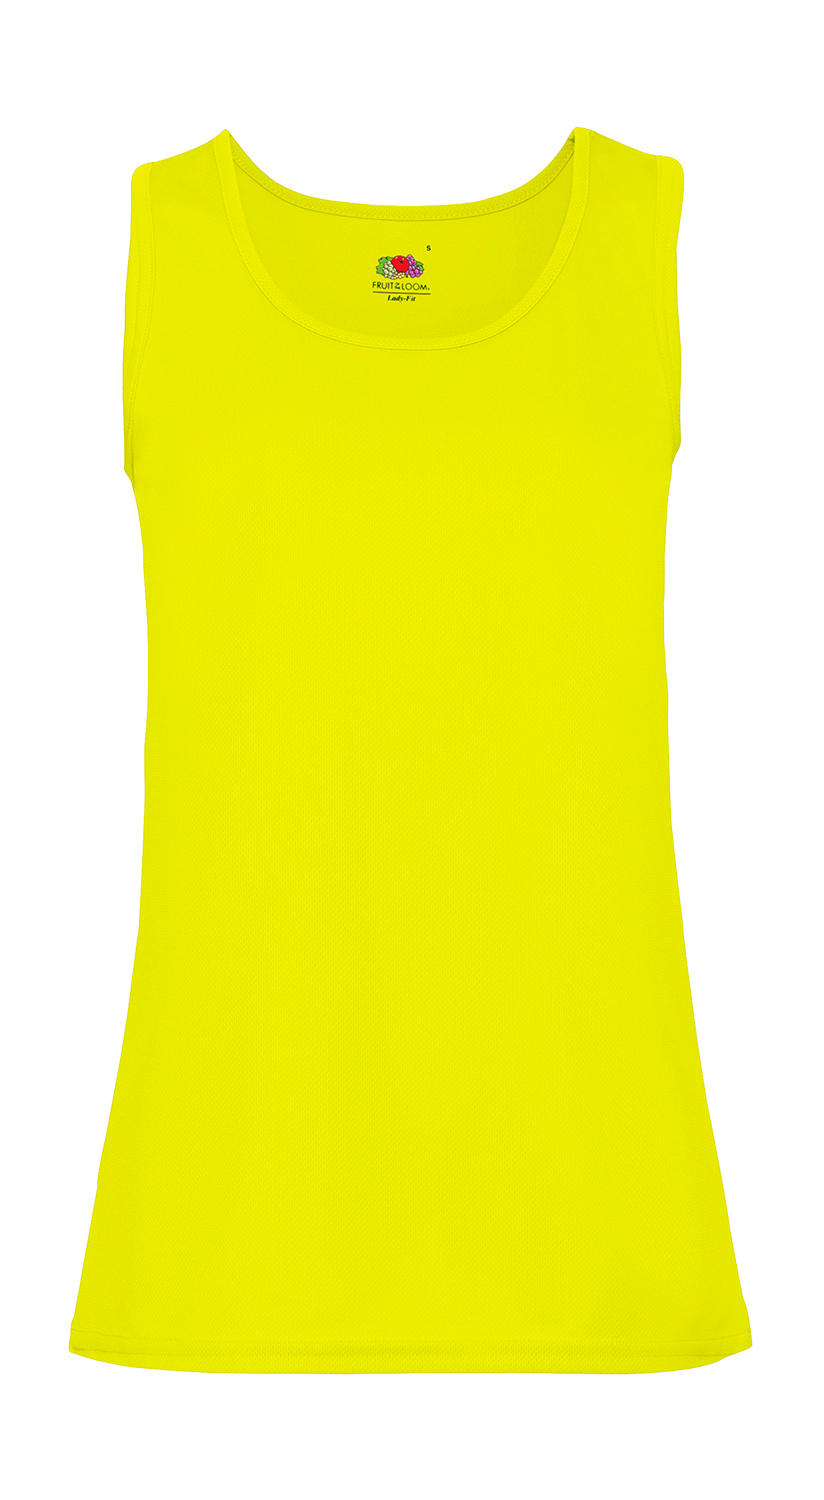  Ladies Performance Vest in Farbe Bright Yellow